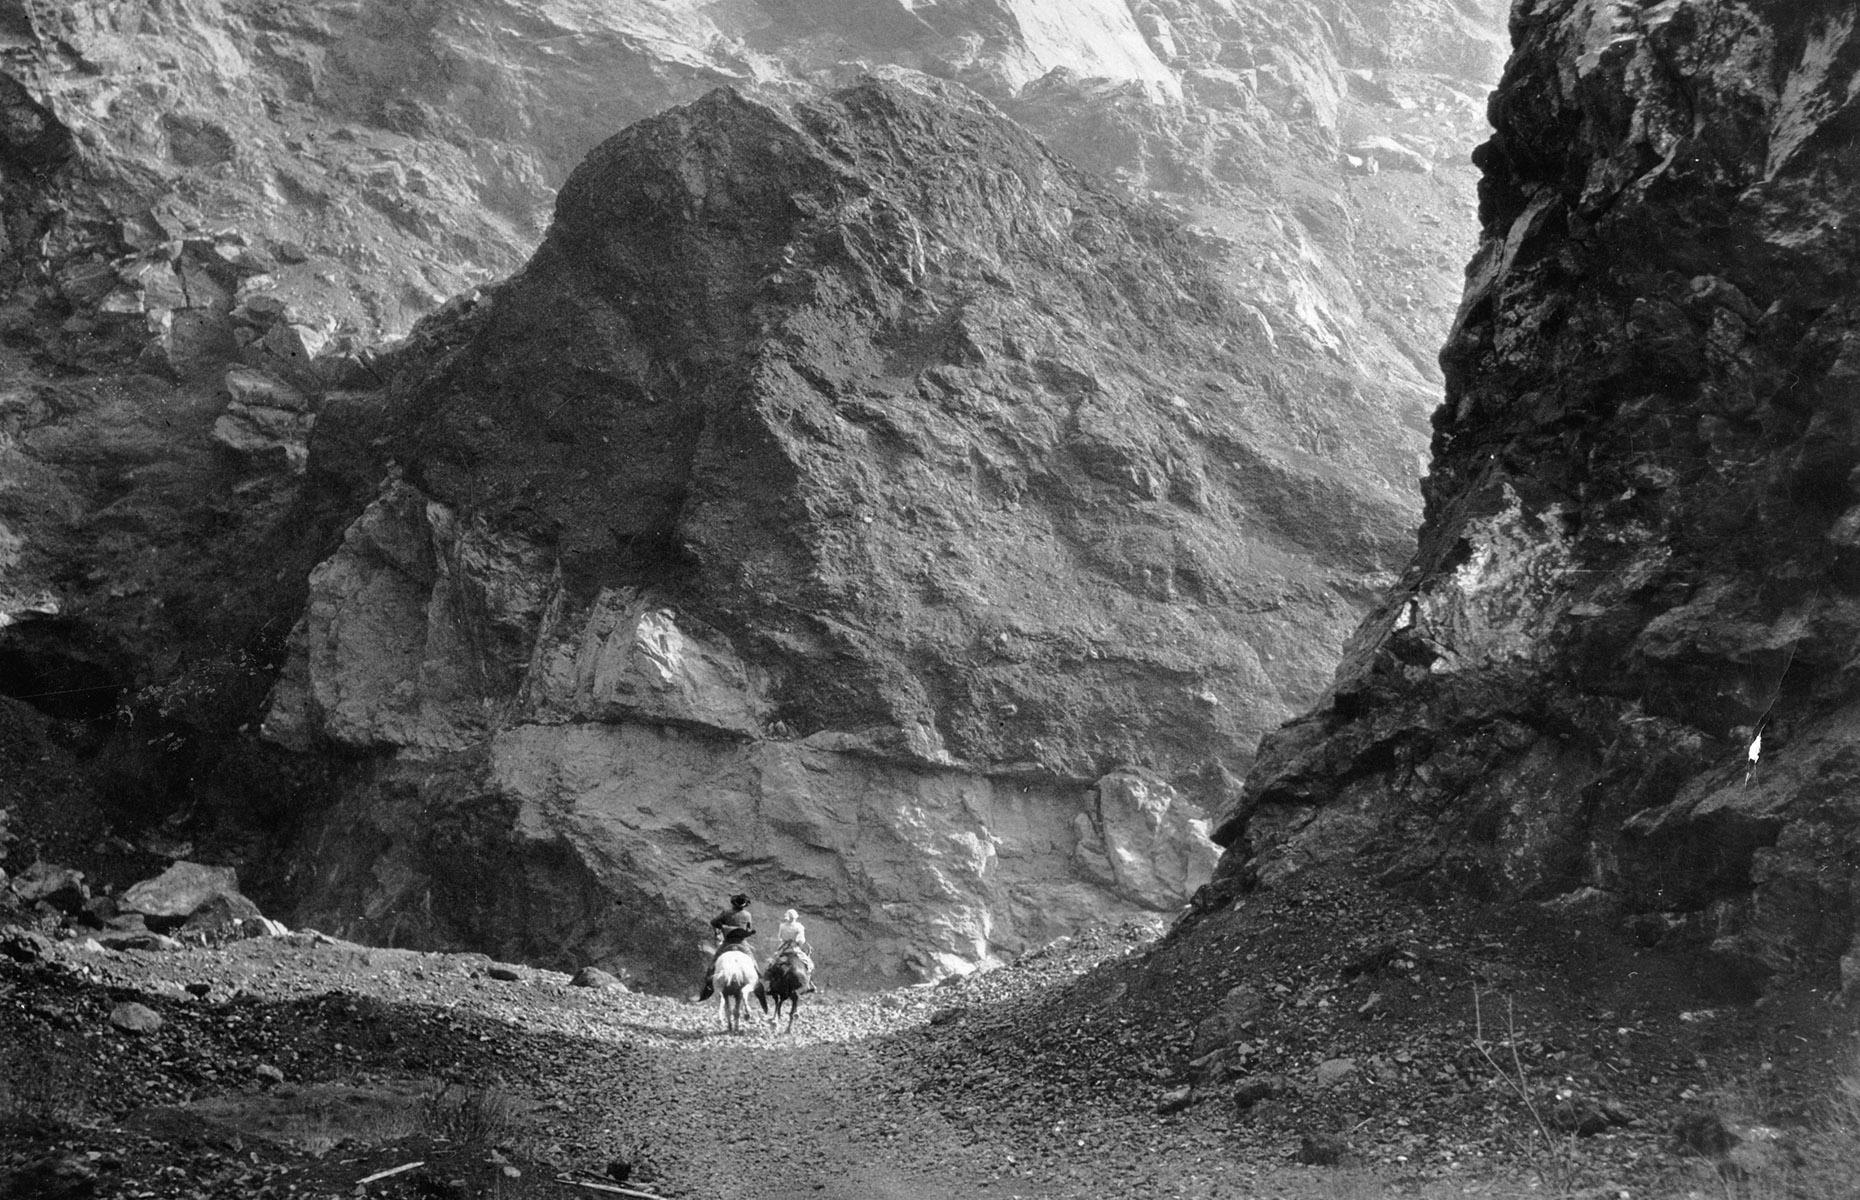 Road improvements continued in Yellowstone through the 1930s – but not everyone favored four wheels. This romantic image shows a pair of horse riders deep within the Grand Canyon of the Yellowstone River, circa 1935.